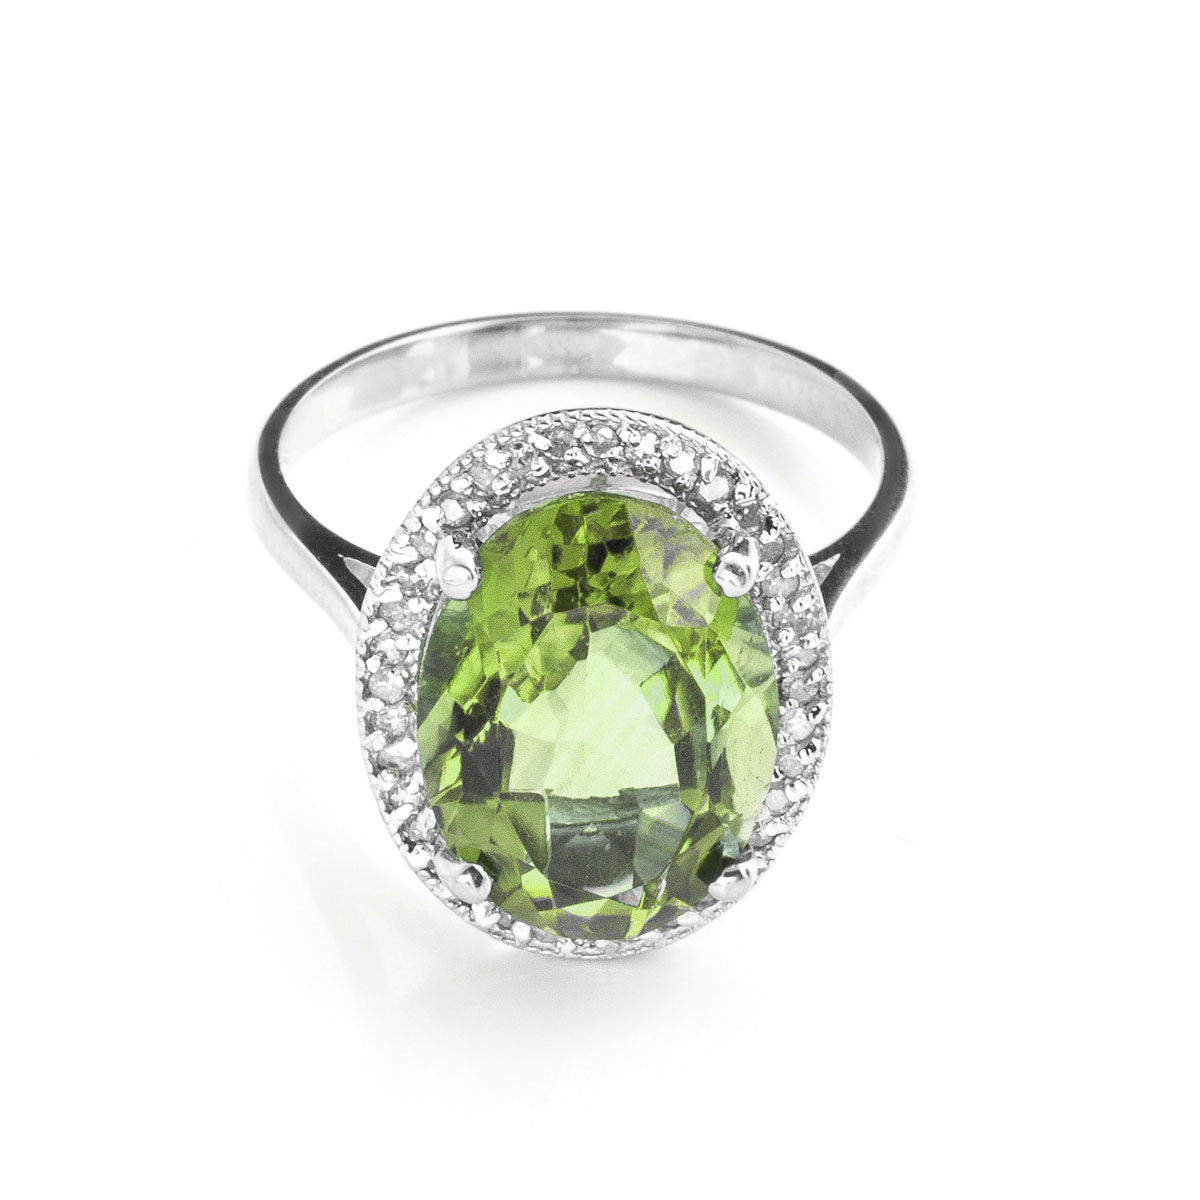 Green Amethyst Halo Ring 5.28 ctw in 9ct White Gold